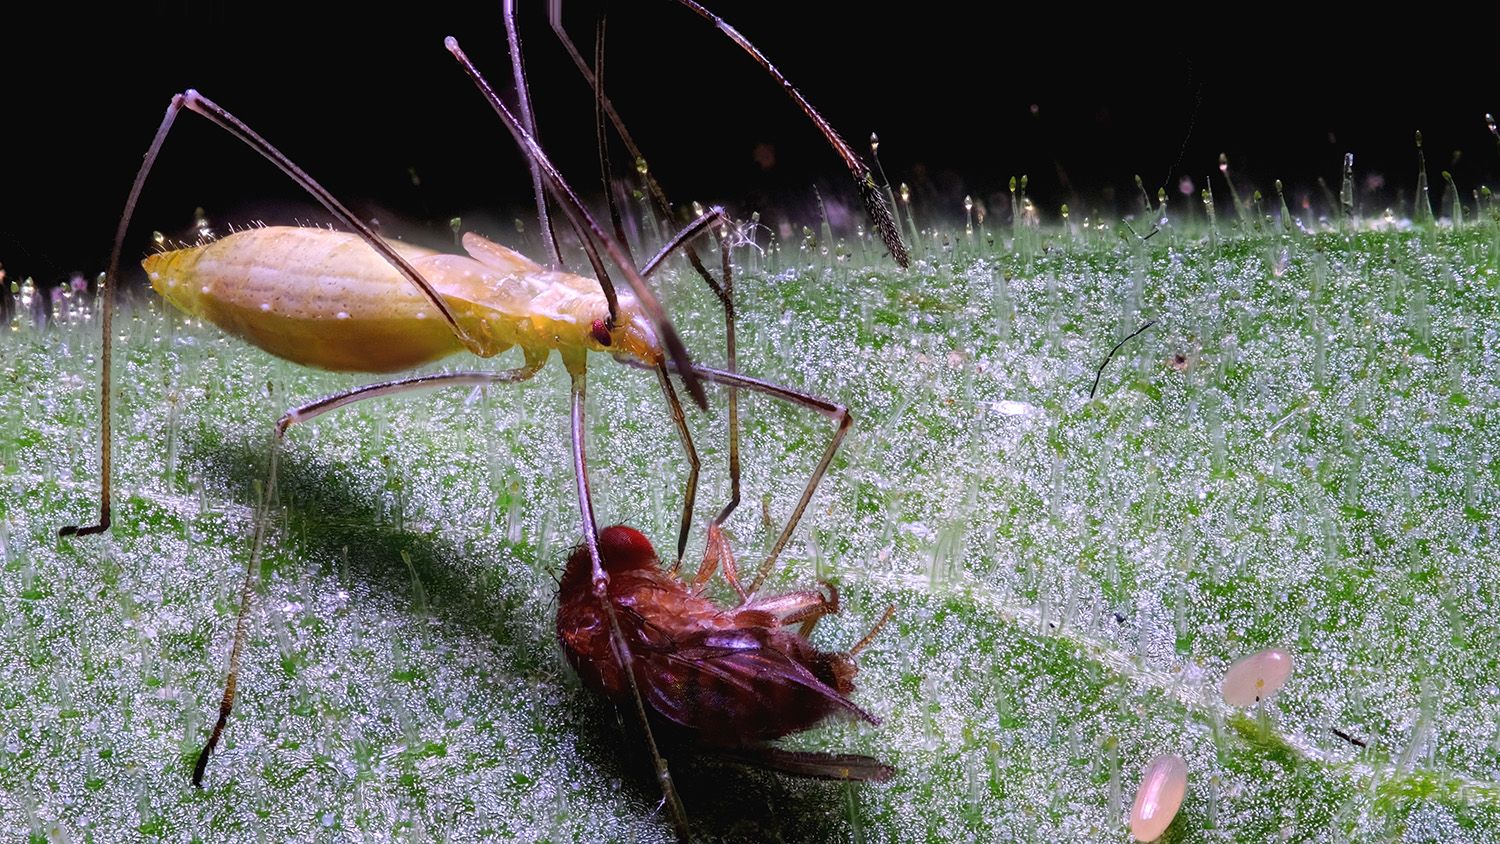 Close up of a stickybug on a leave with another insect.